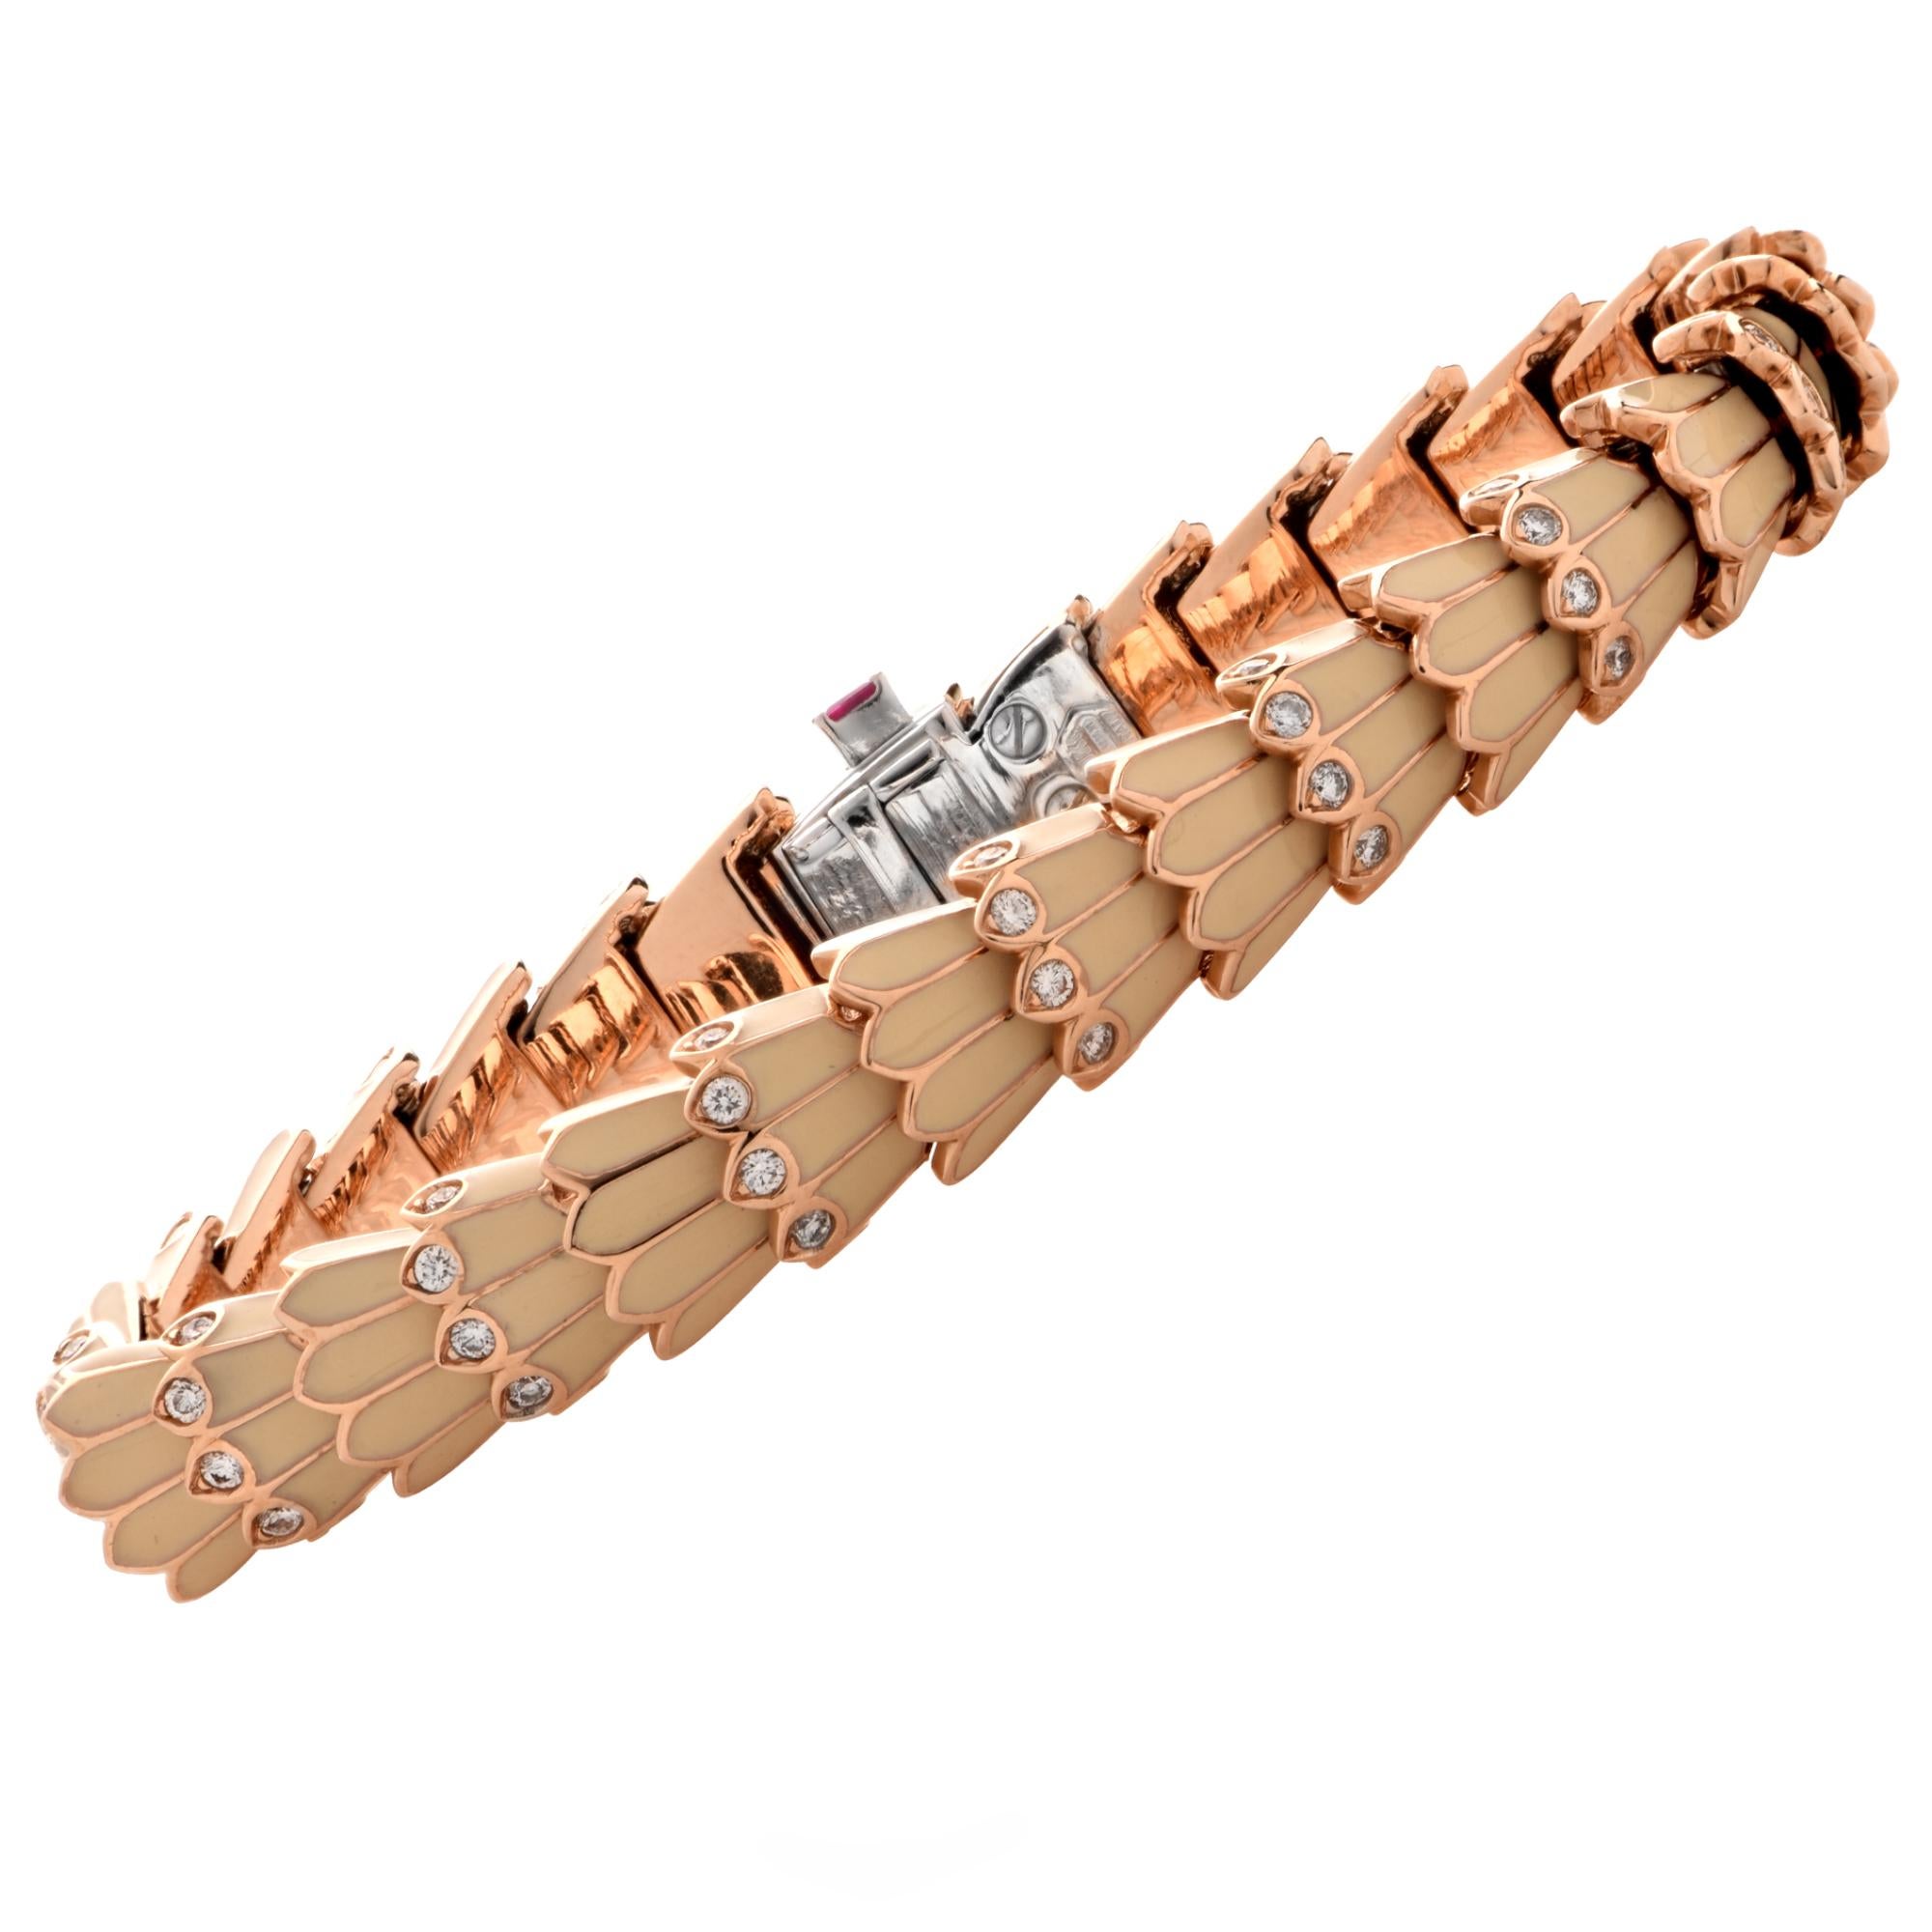 Sensational Roberto Coin cream enamel and diamond bracelet crafted in 18k rose gold. Feast your senses on this superbly crafted piece of Italian fine jewelry. This gorgeous bracelet features cream enamel scales framed in rich, warm rose gold,